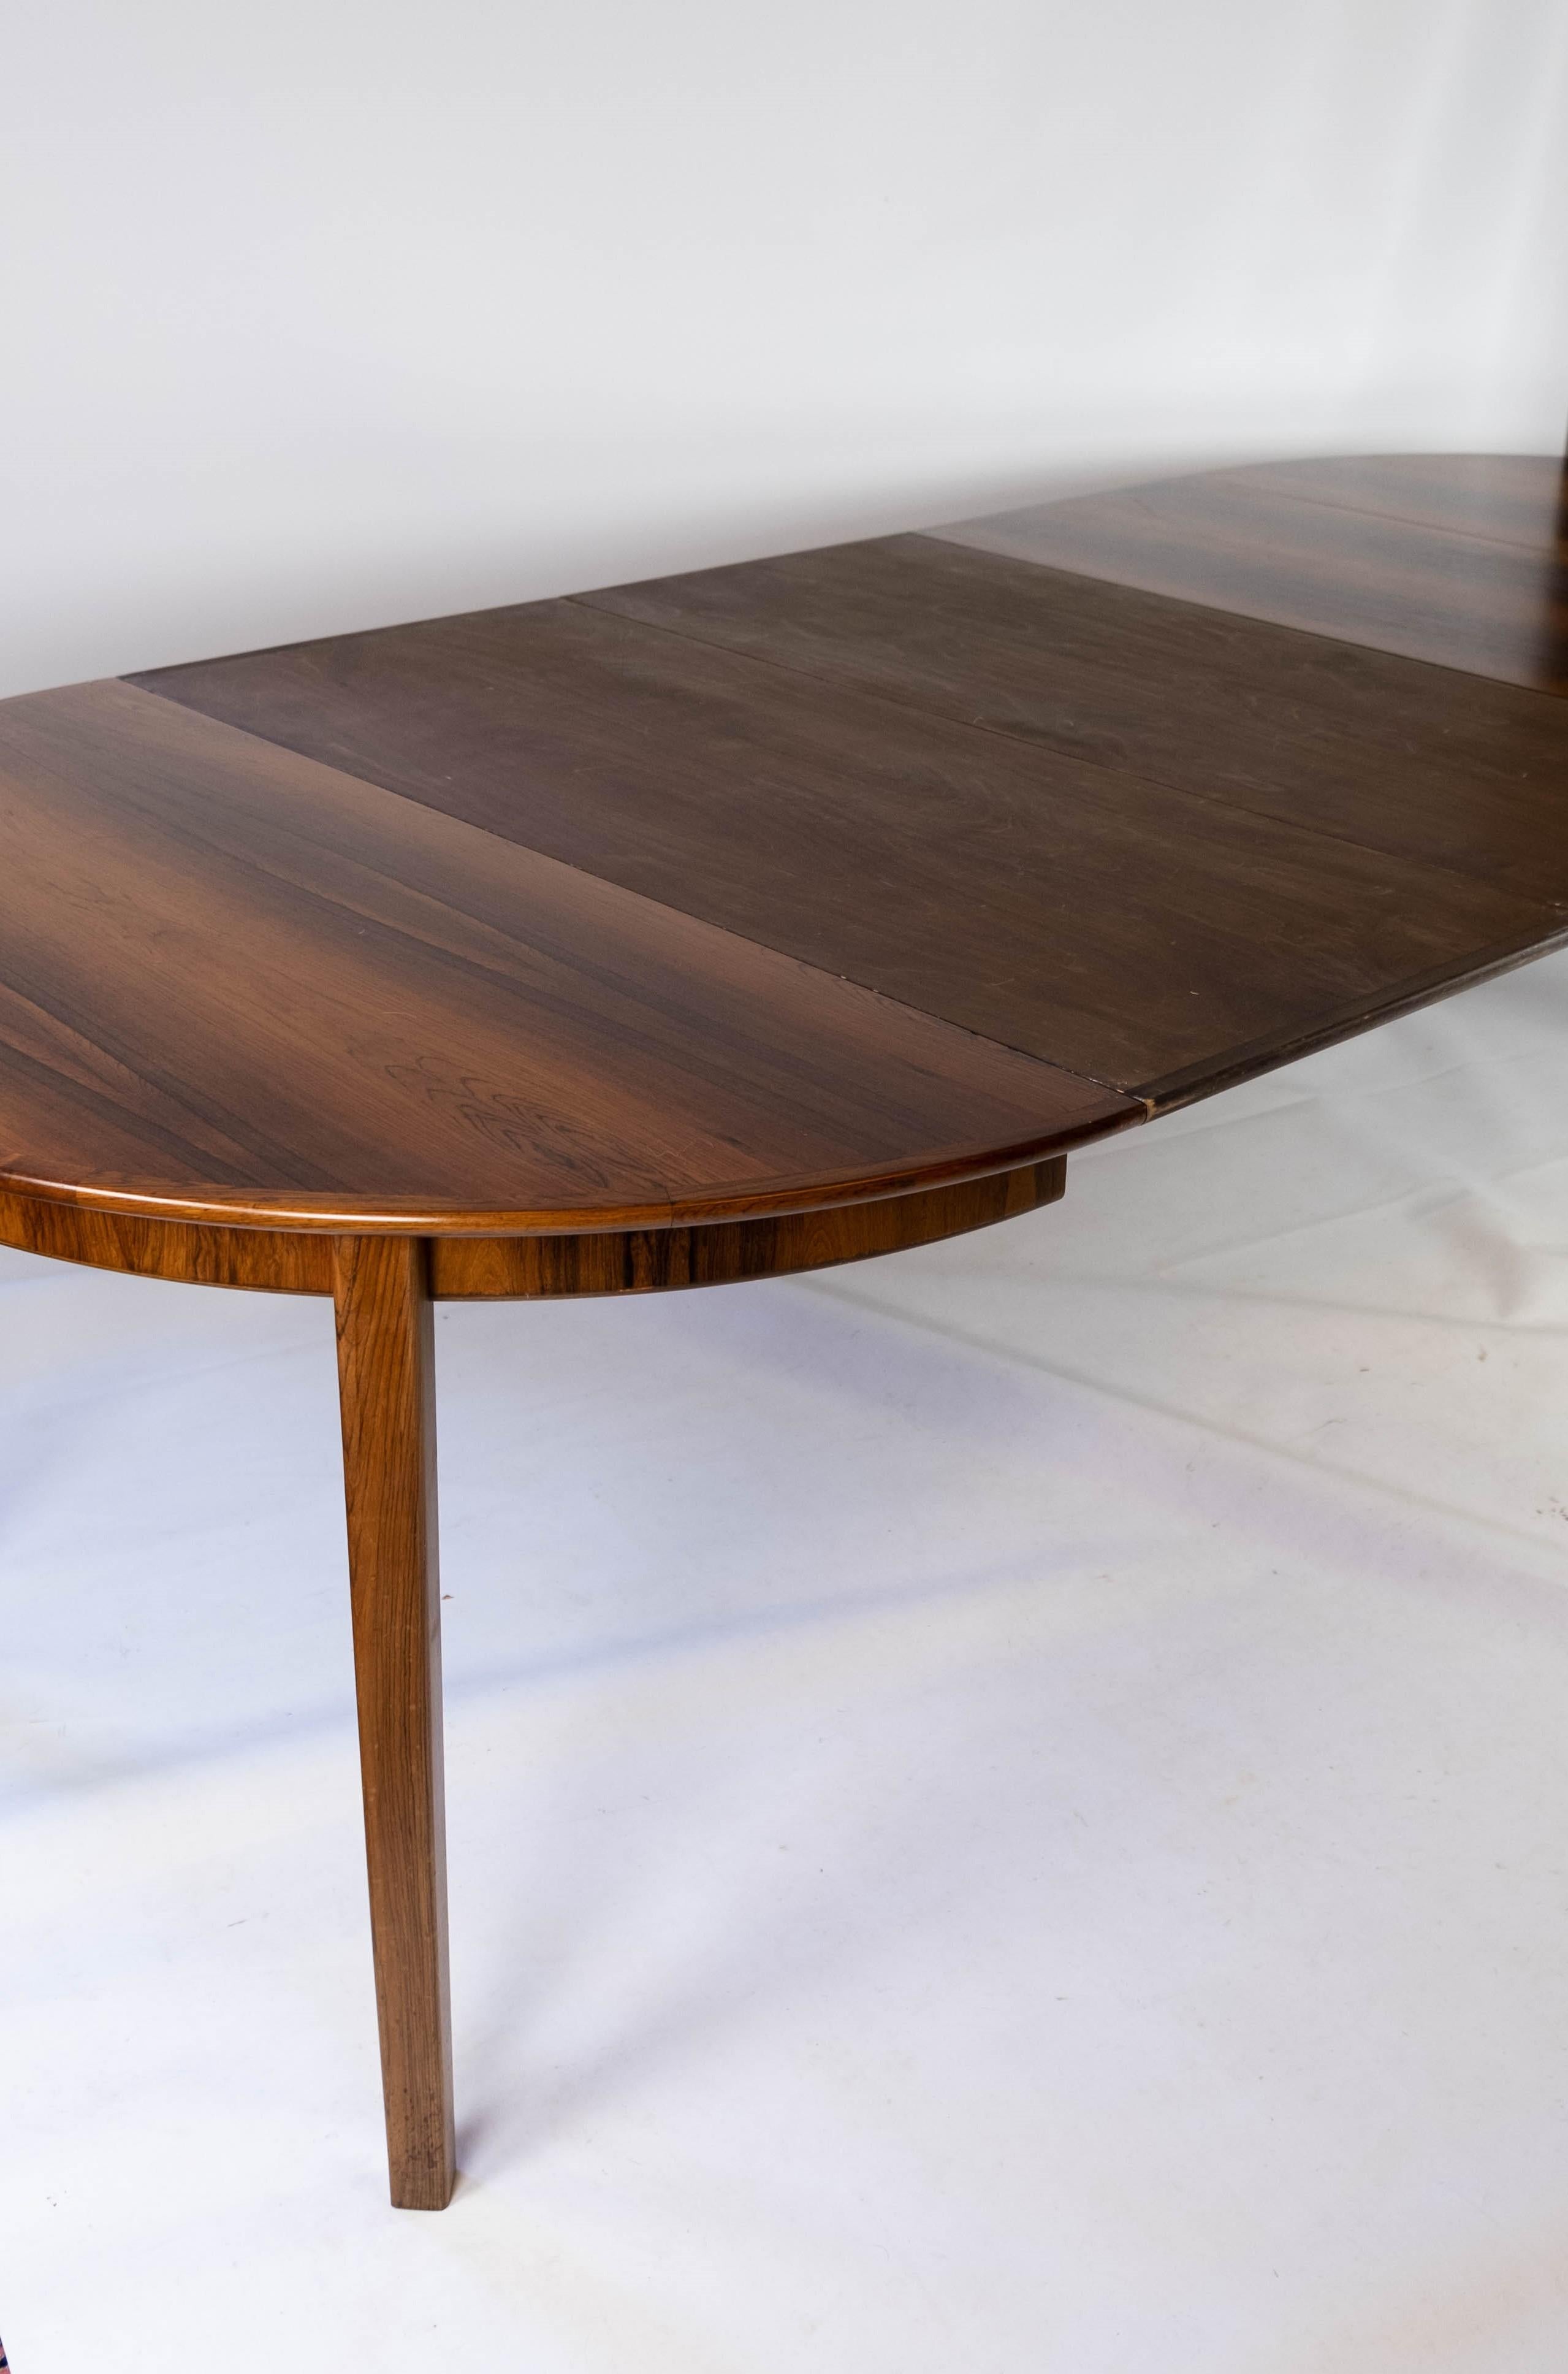 Dining Table Made In Rosewood With Extension Plates, Danish Design From 1960s For Sale 6